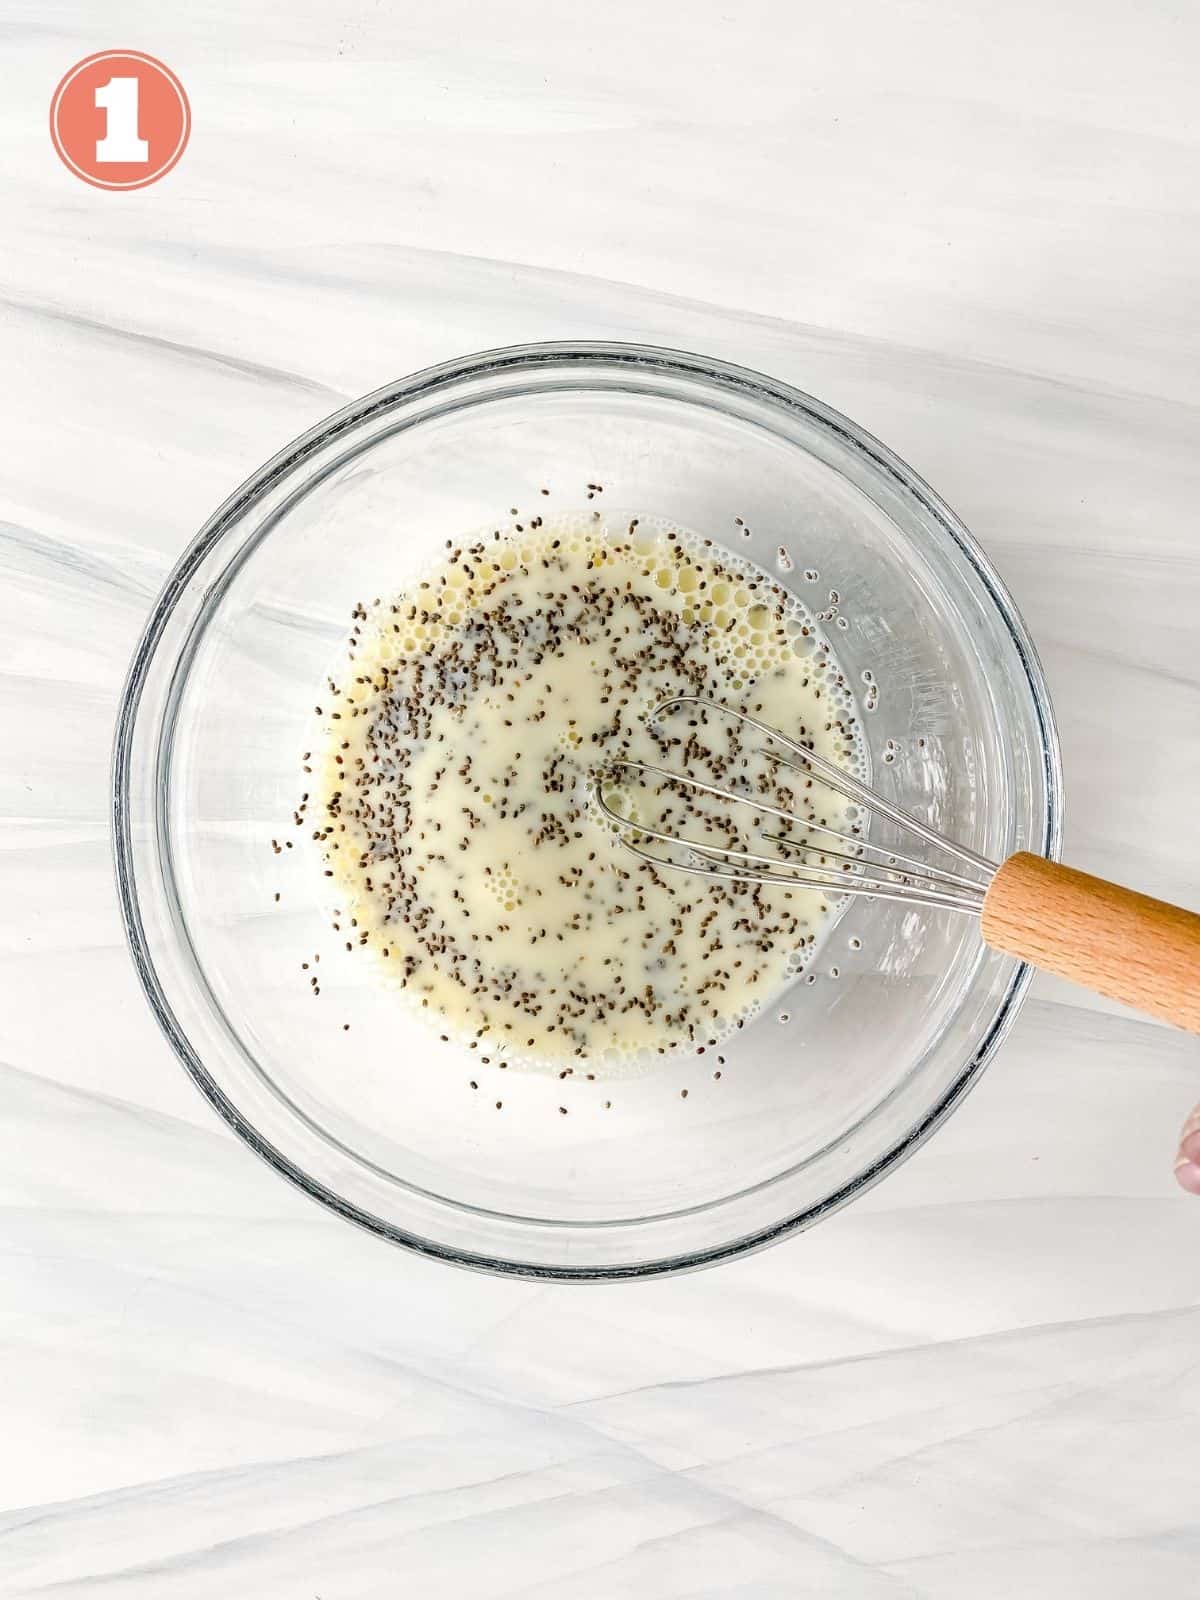 chia seeds and milk in a glass bowl being whisked.